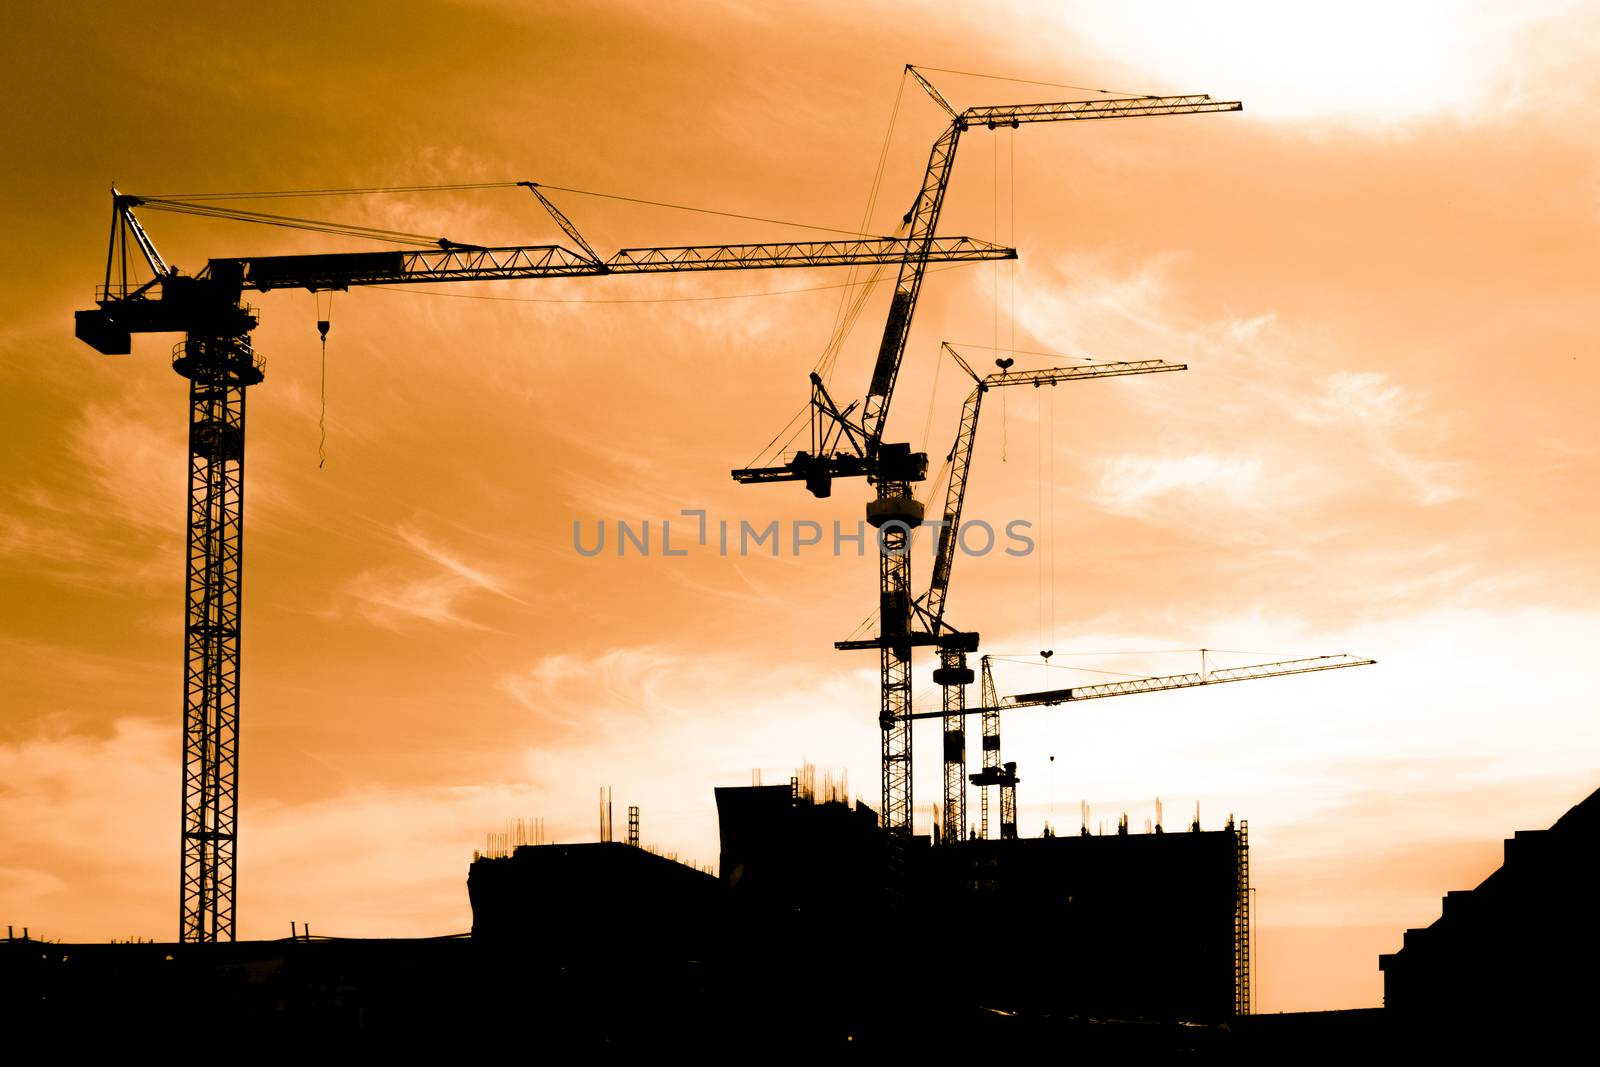 Silhouette of construction workers on scaffold working under a hot sun